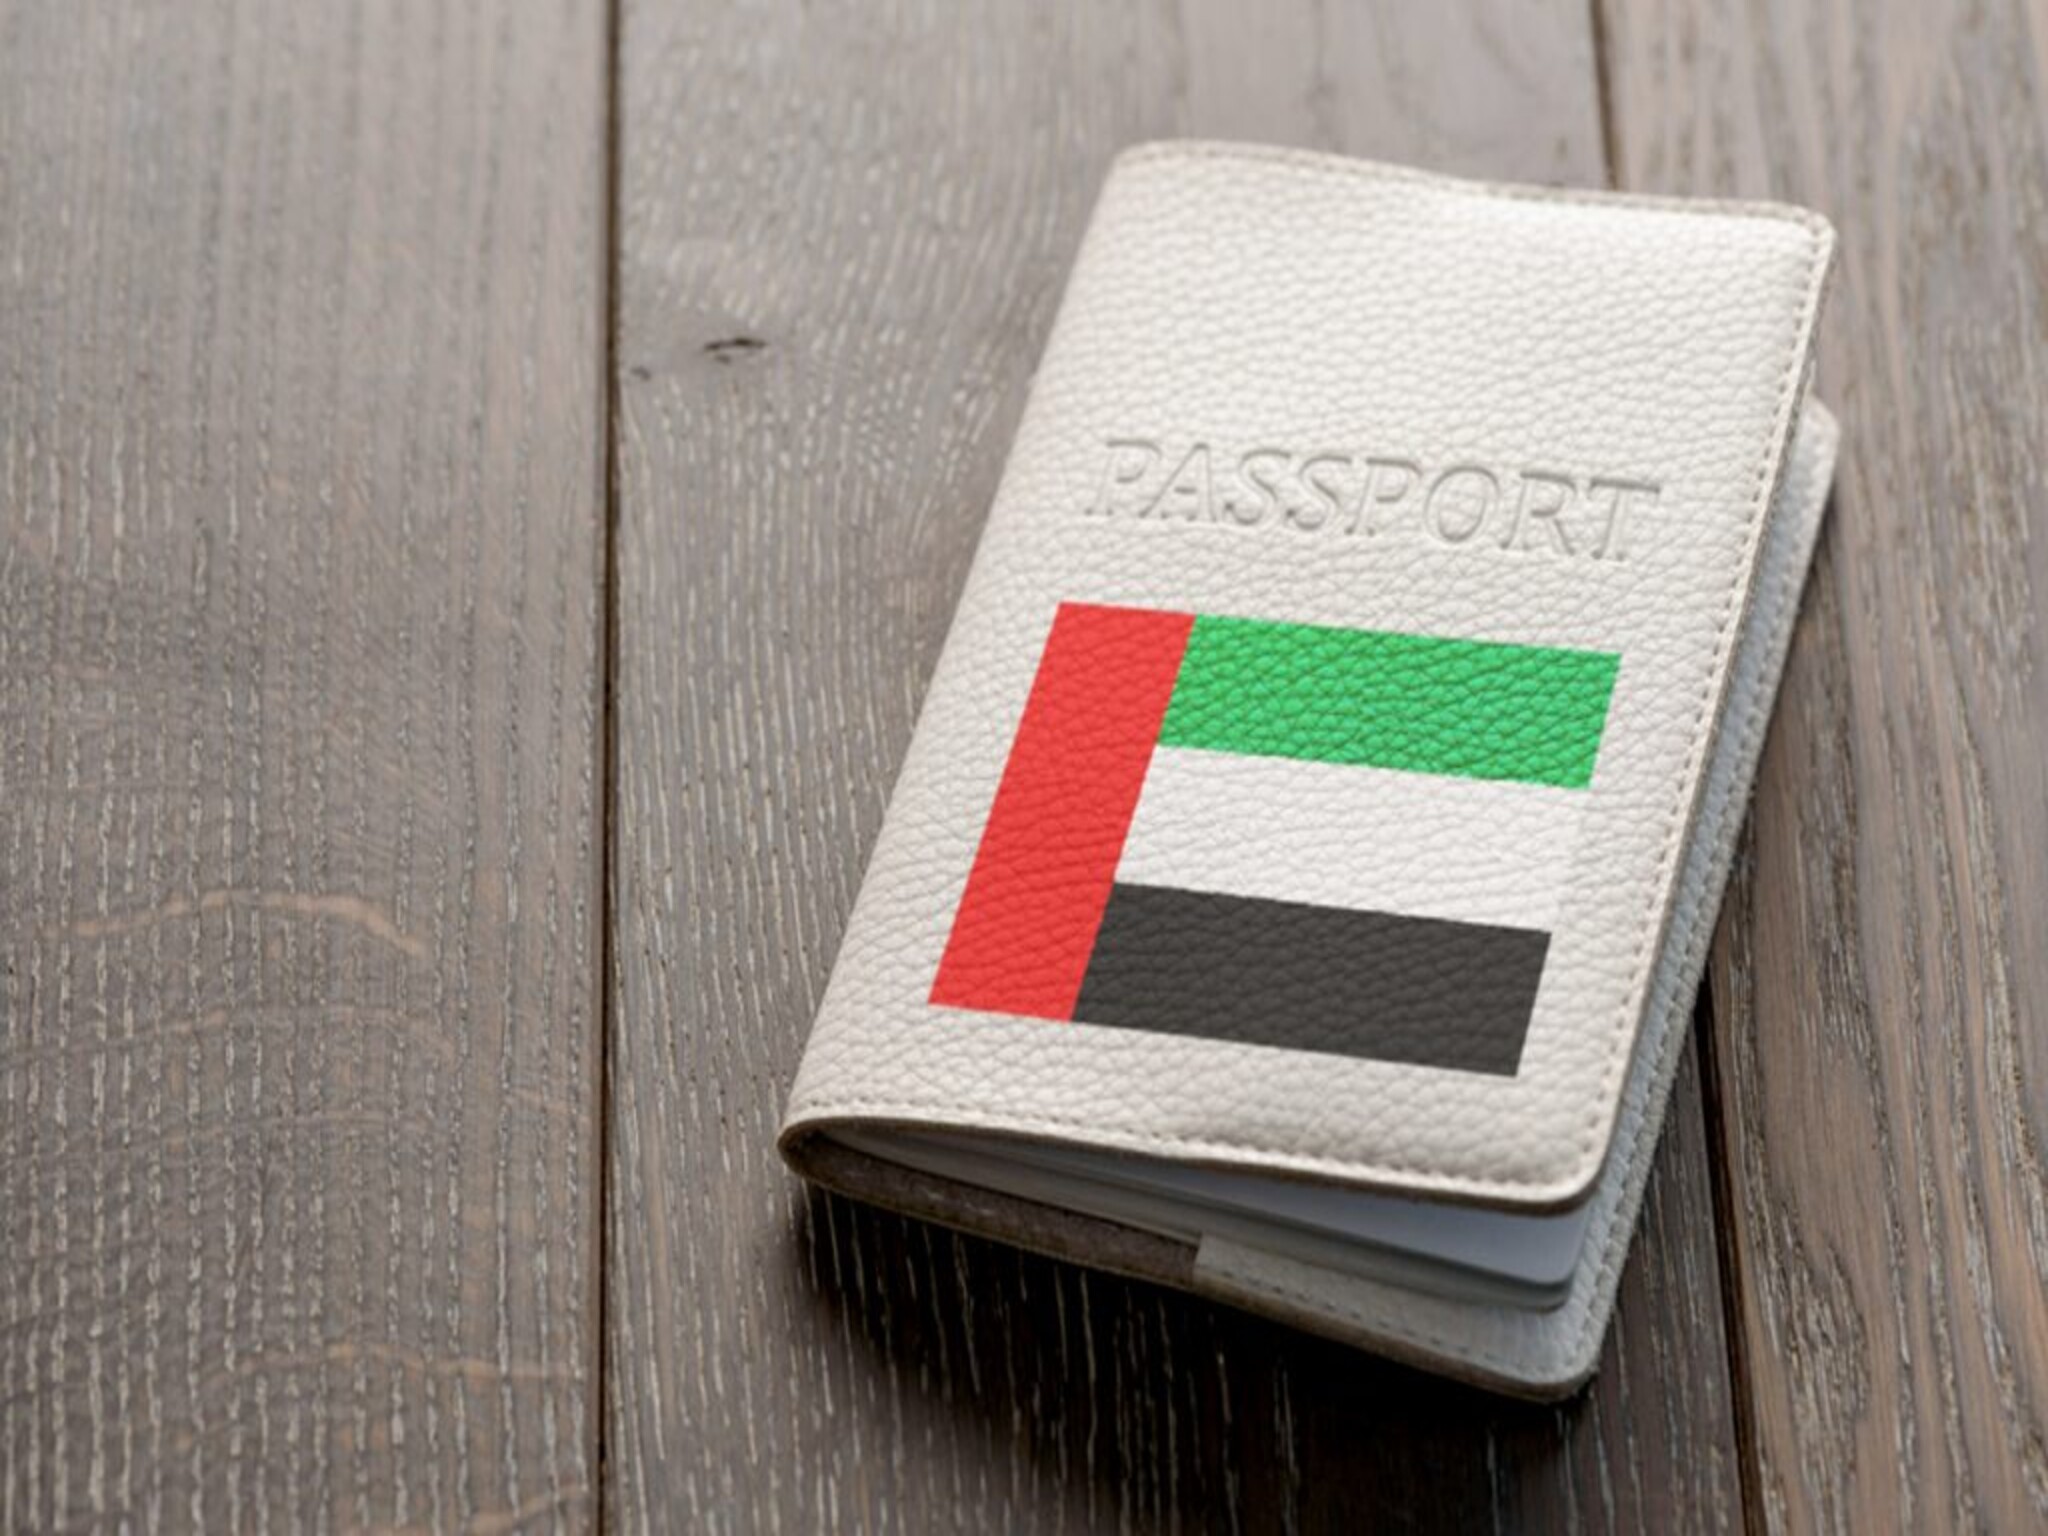 Link to inquire about Dubai visa with passport number gov.ae and method of inquiry